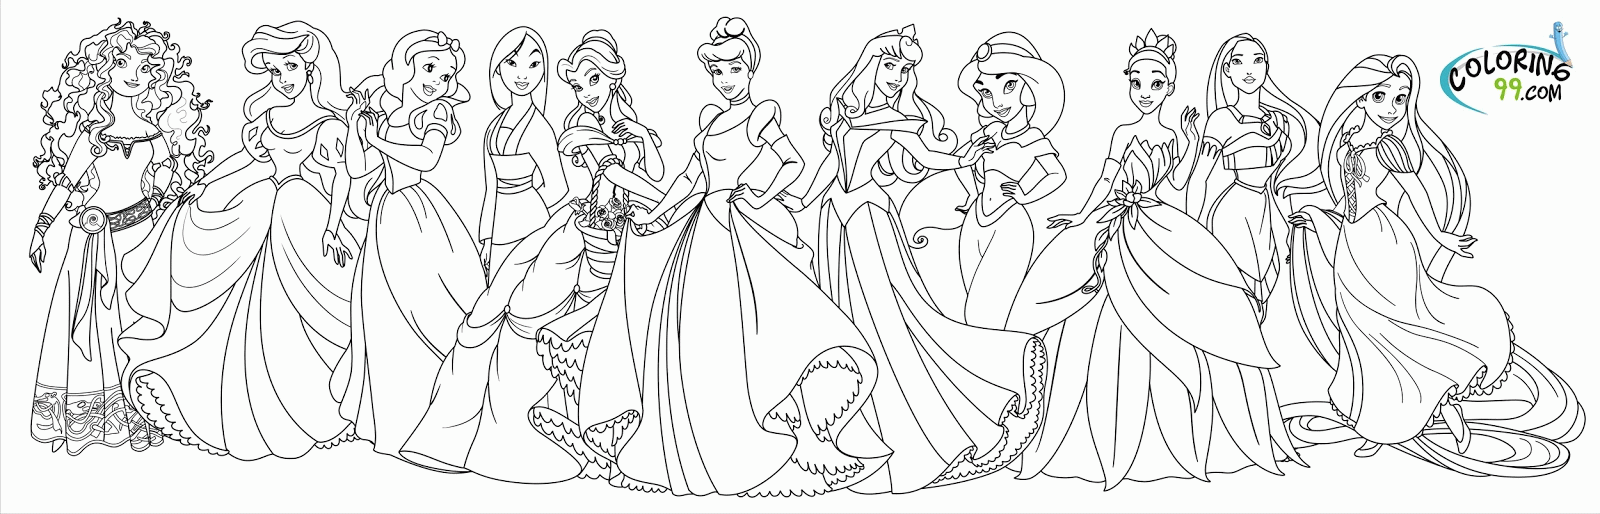 All Disney Princess Head Coloring Pages   Coloring Pages For All ...